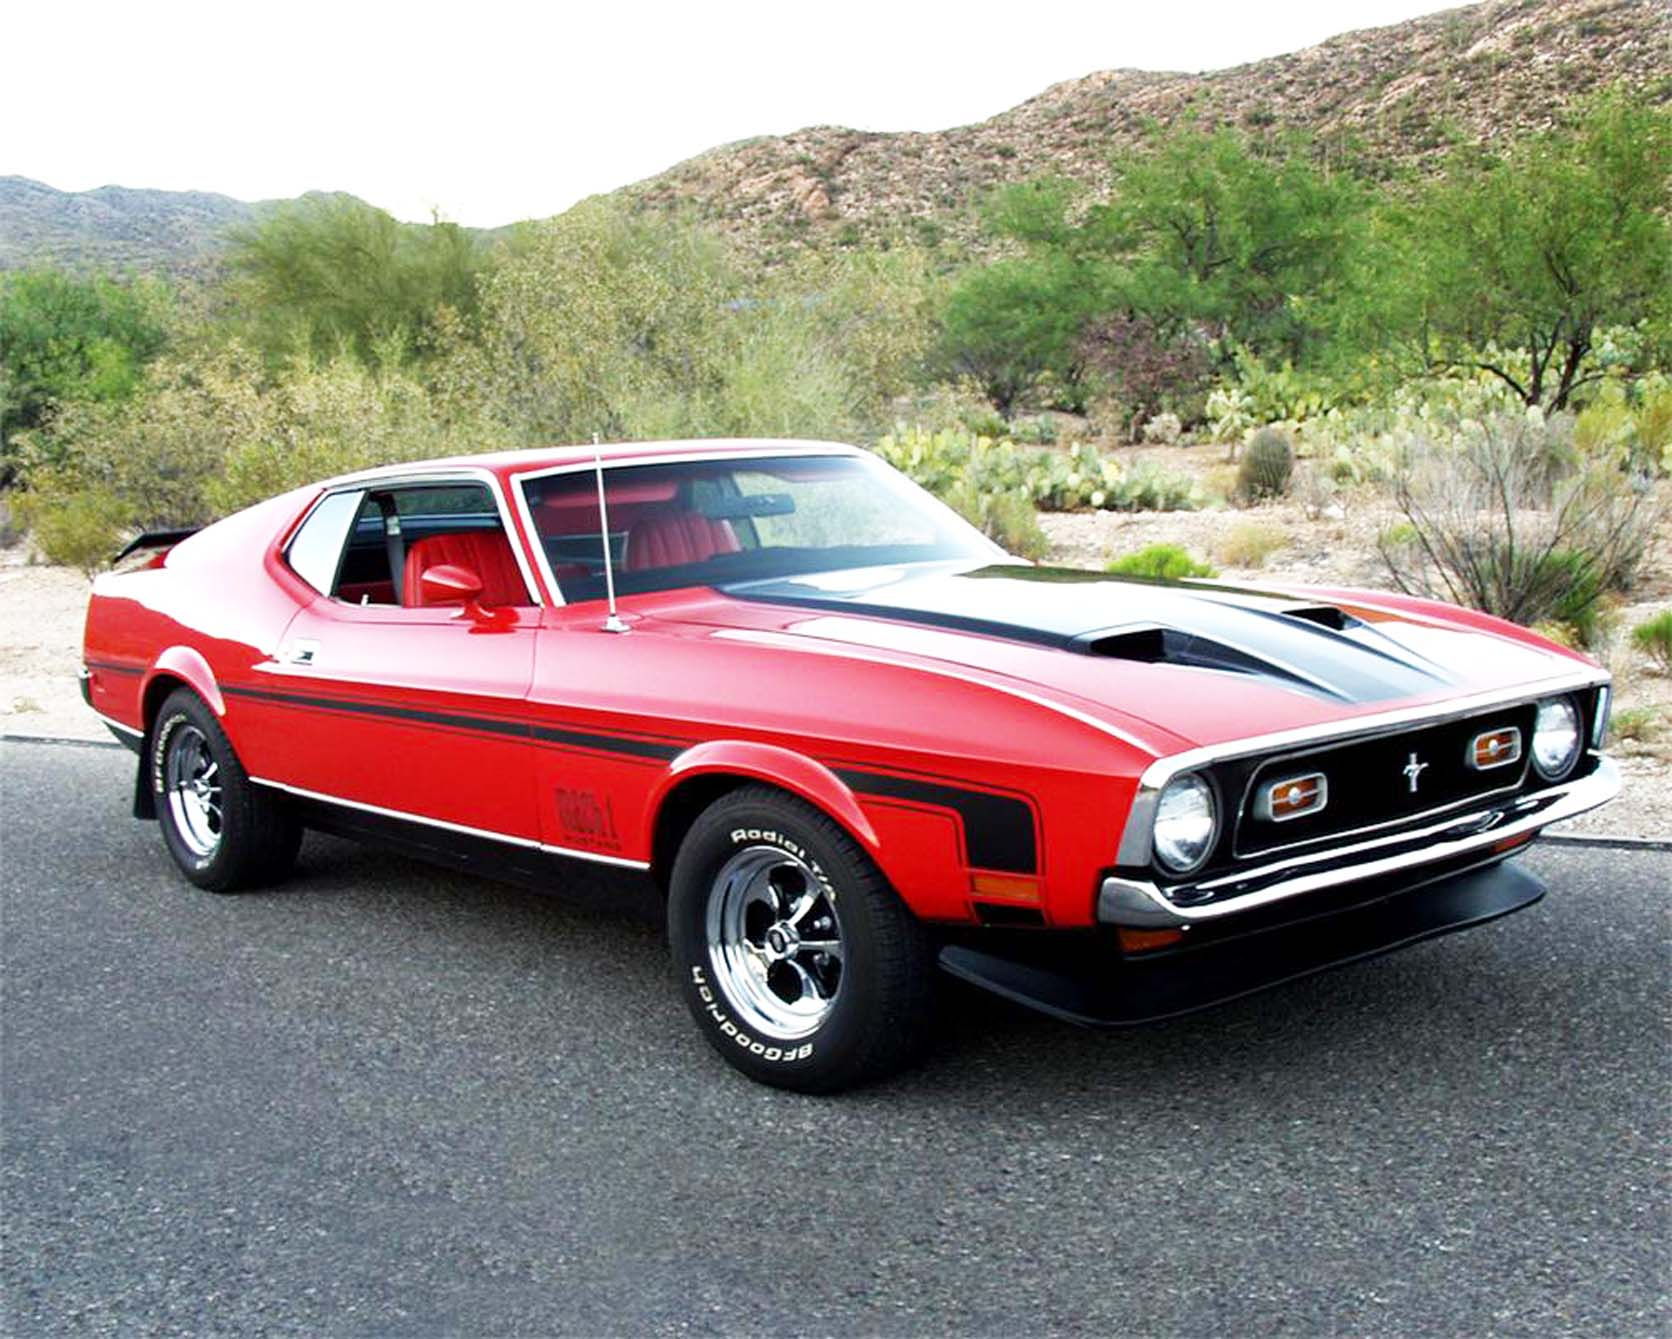 Ford Mustang Mach 1 - Wikipedia